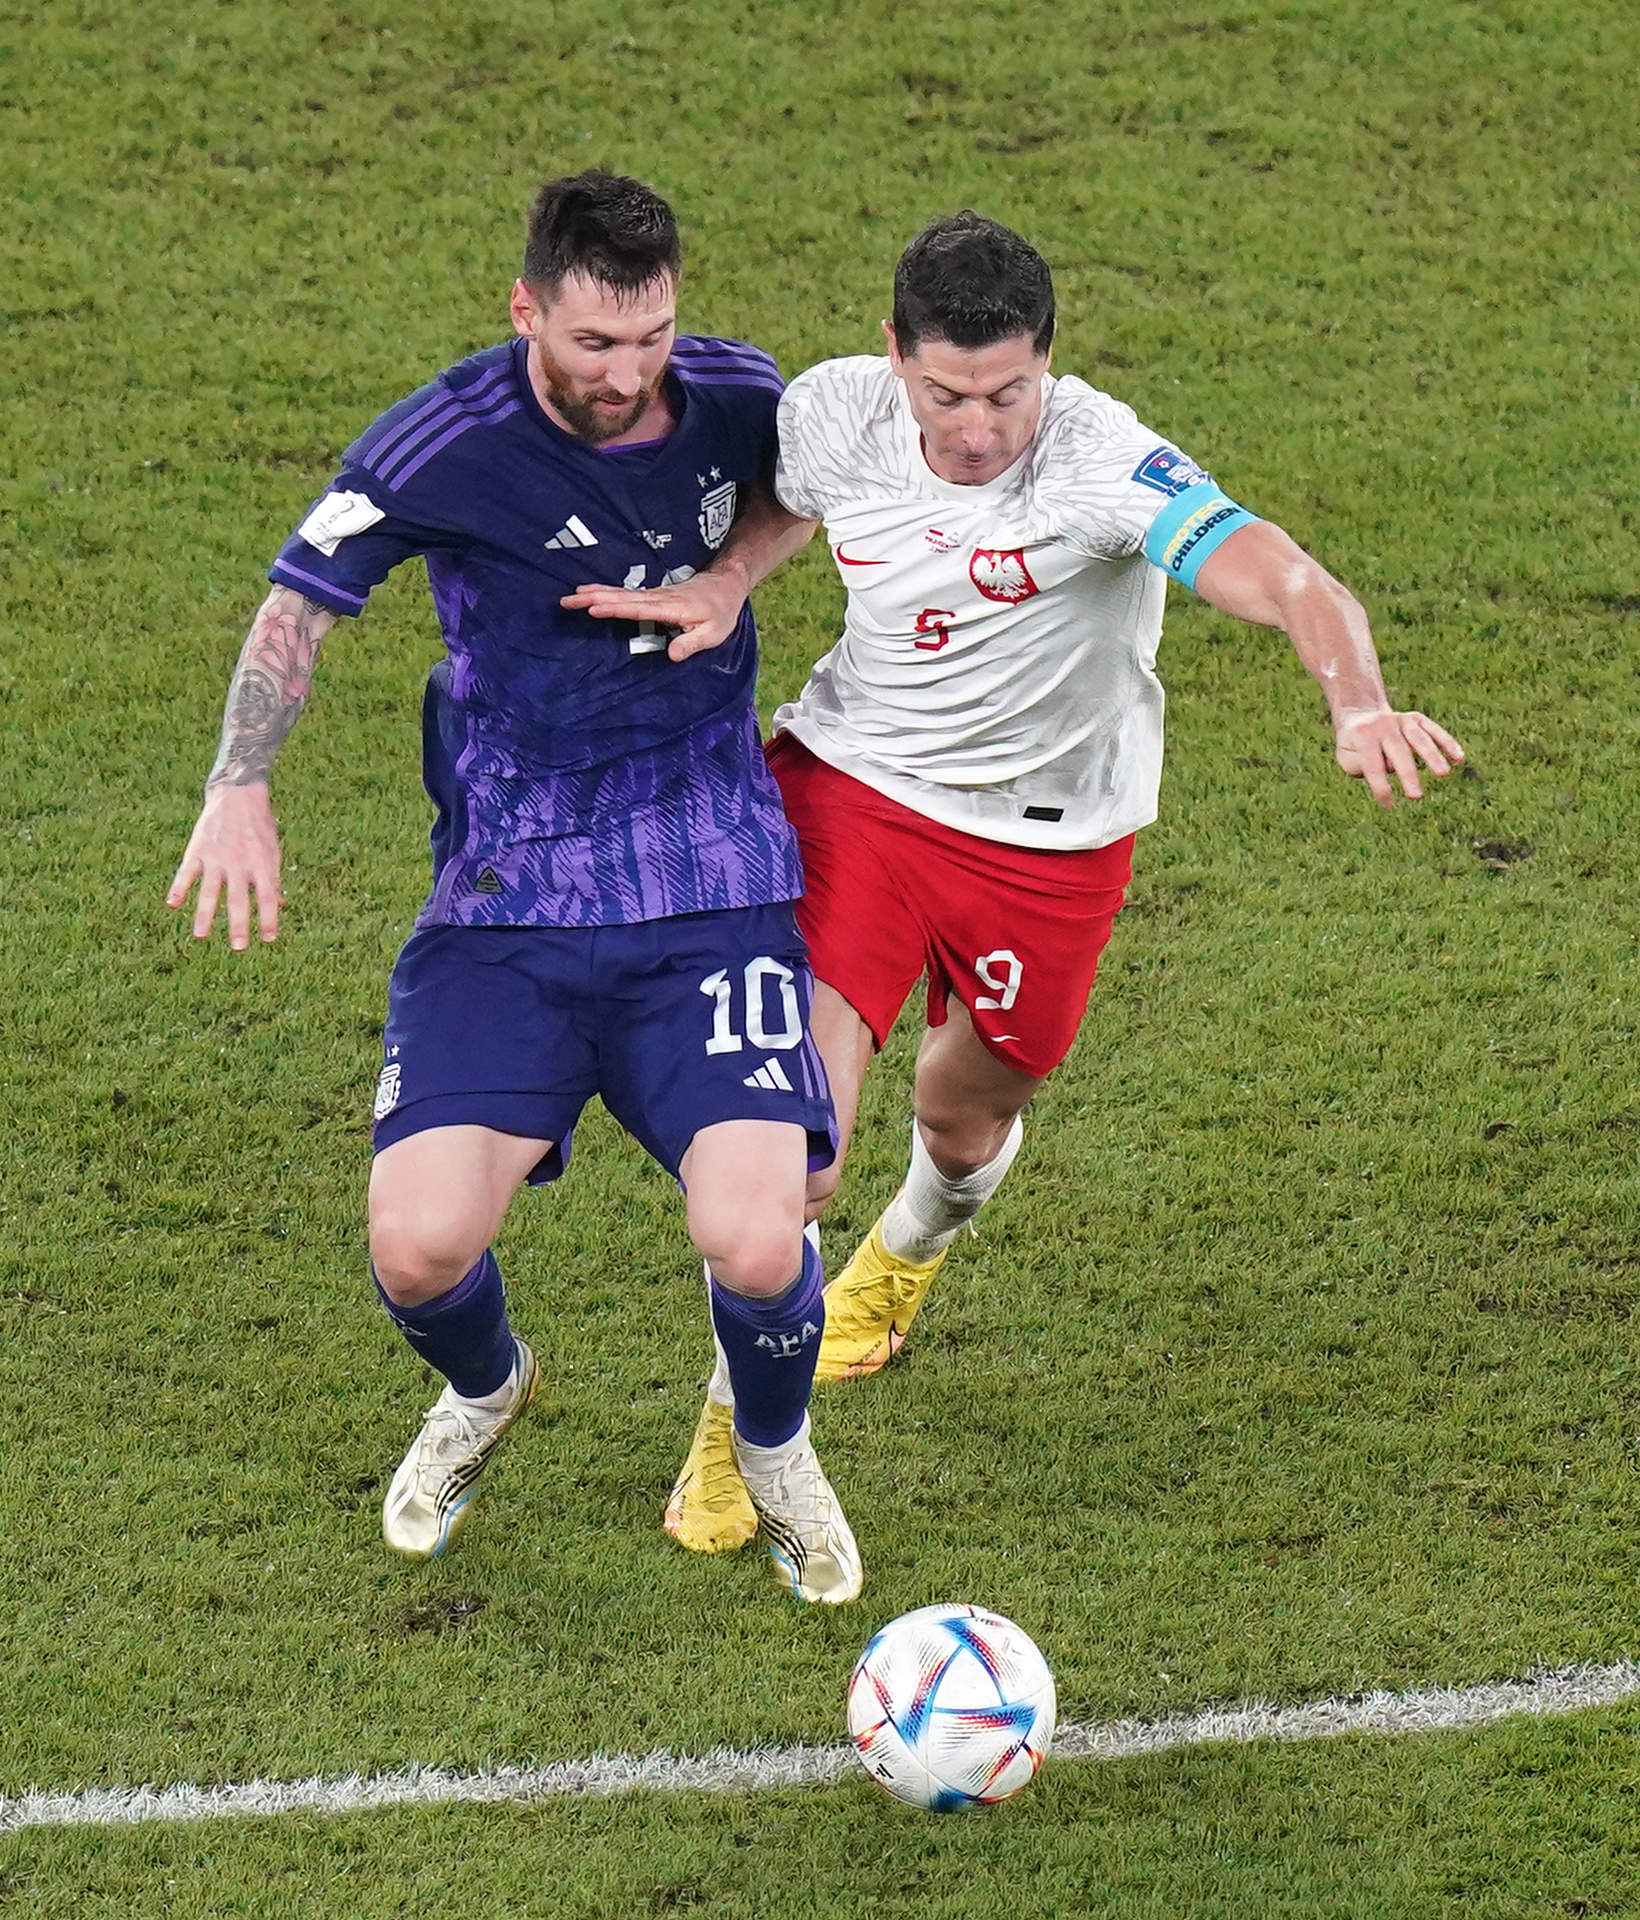 30 November 2022, Qatar, Doha: Argentina's Lionel Messi (L) and Poland's Robert Lewandowski battle for the ball during the FIFA World Cup Qatar 2022 Group C soccer match between Poland and Argentina at Stadium 974. Photo: Adam Davy/PA Wire/dpa
Fecha: 30/11/2022.